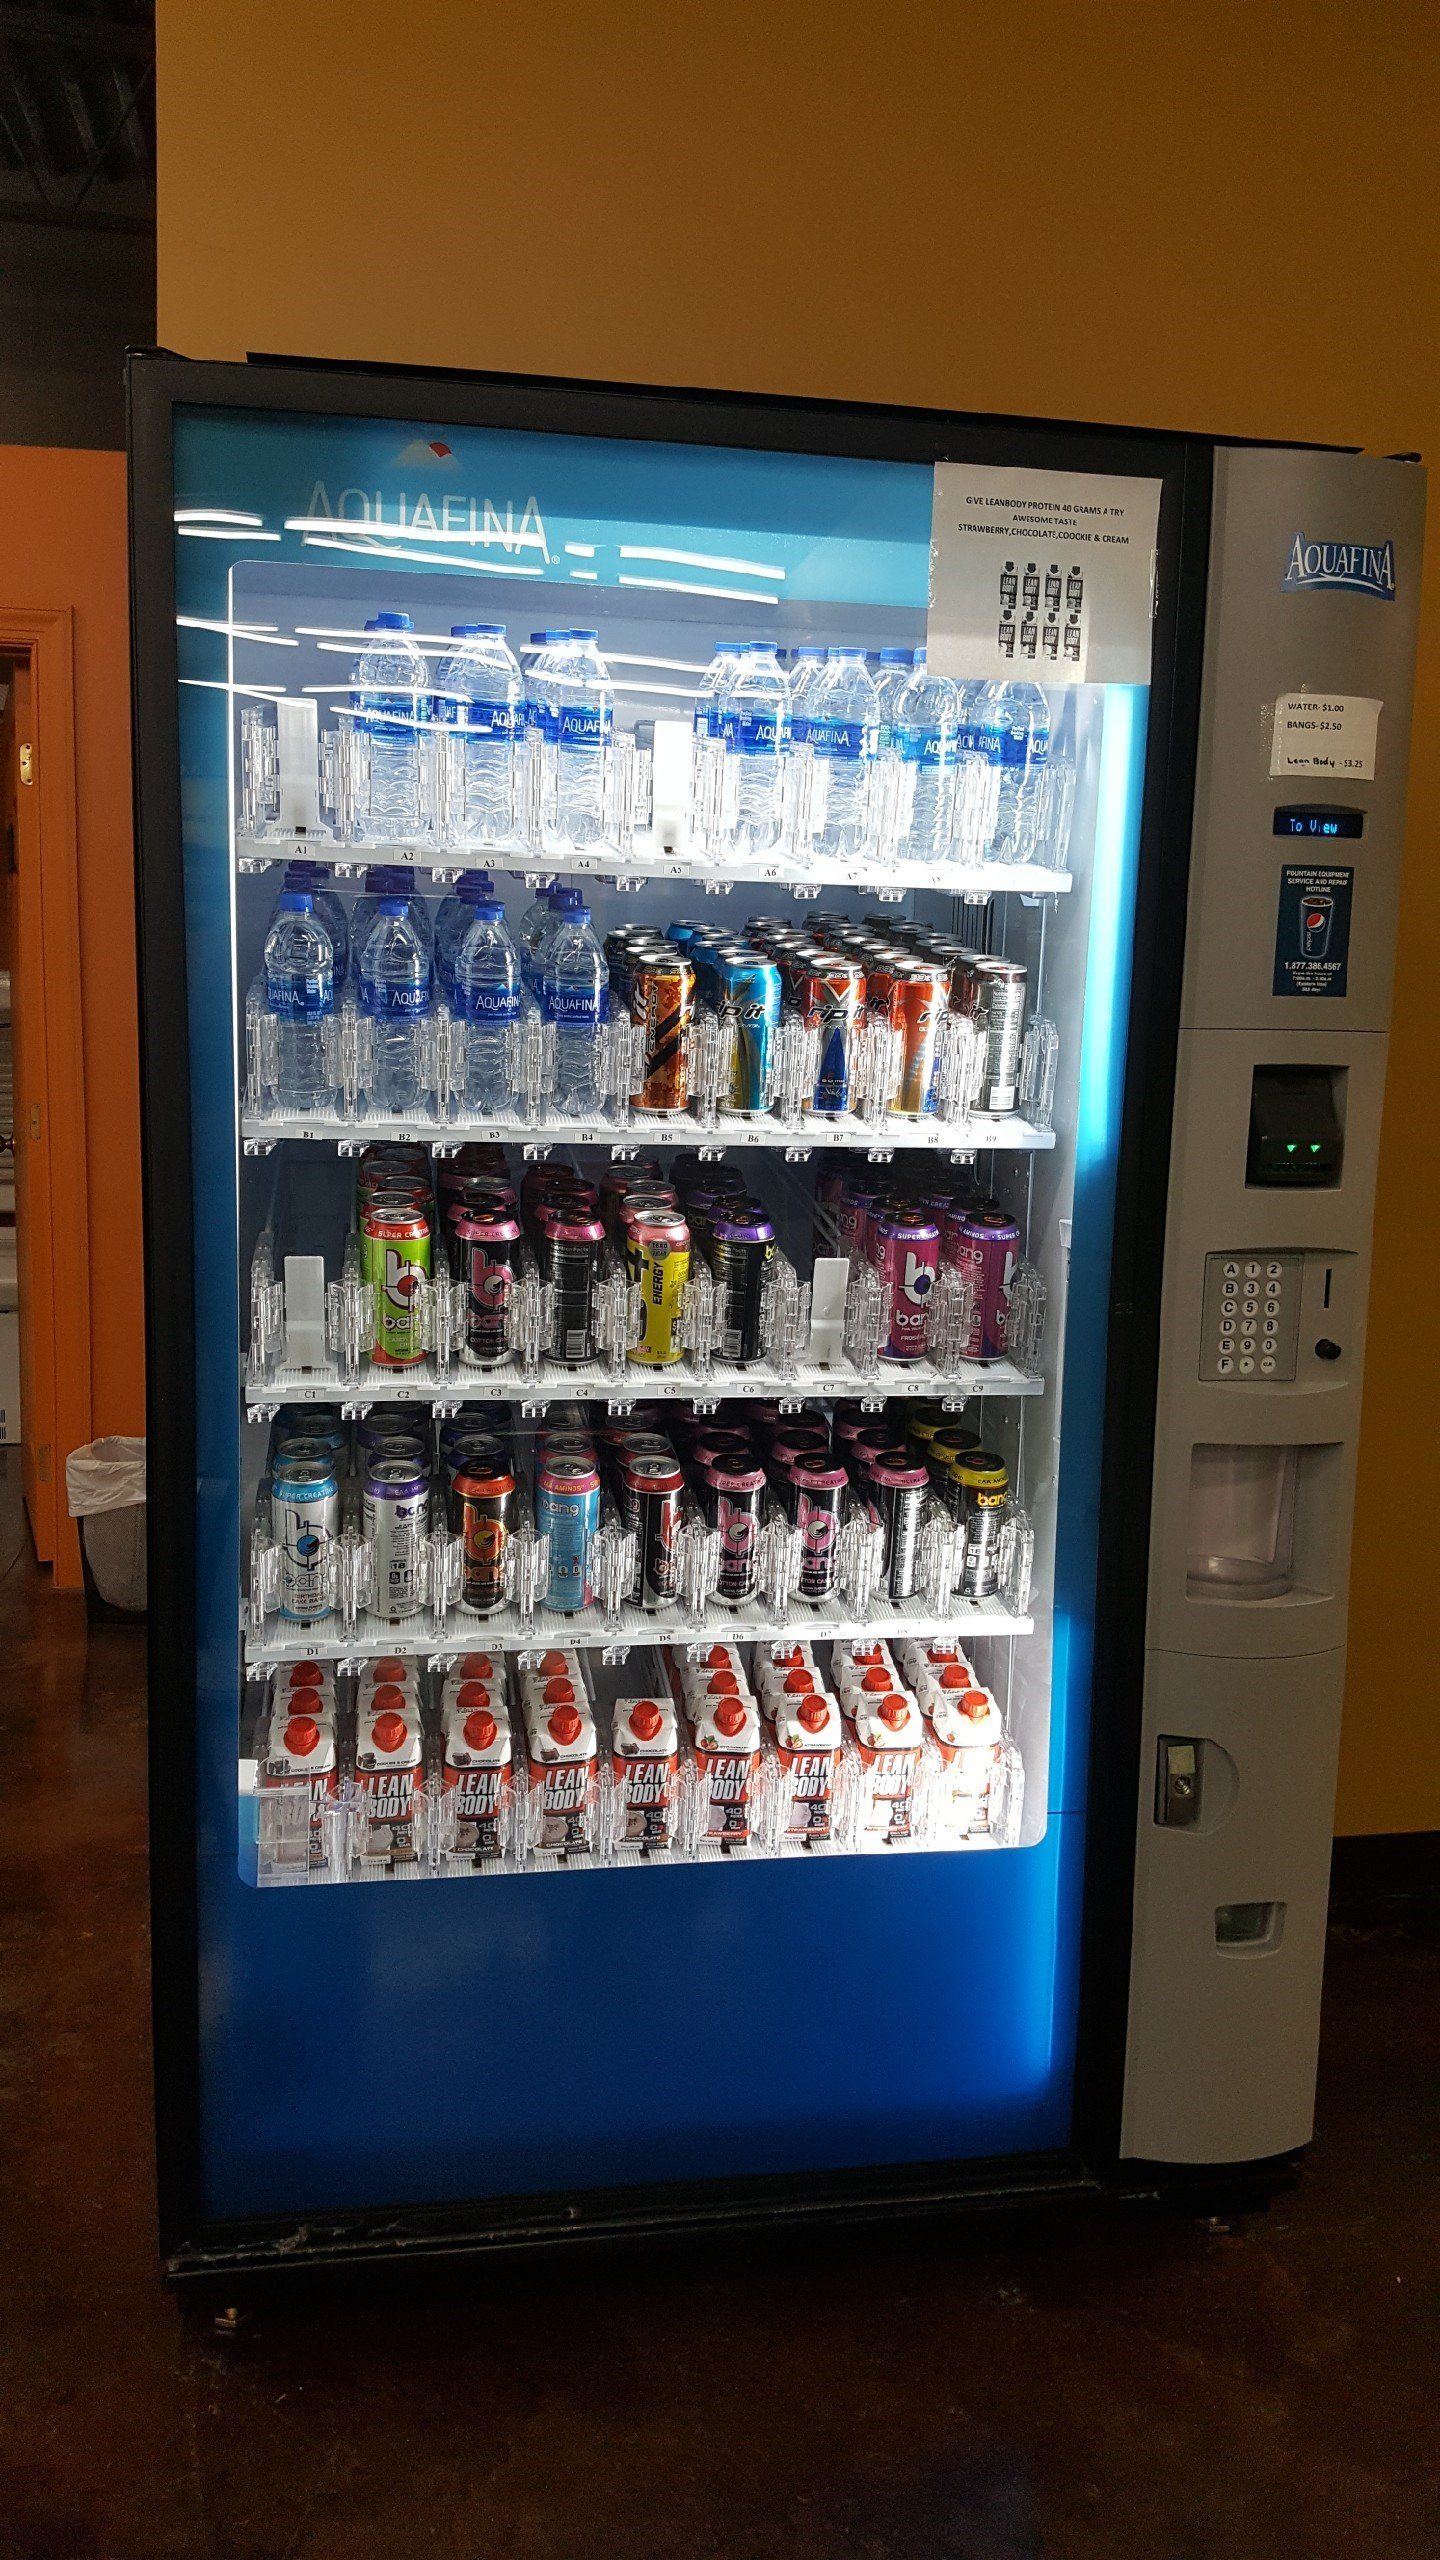 Gym Near Me - Anytime Fitness Lexington KY - Drink Machine - Stay Hydrated